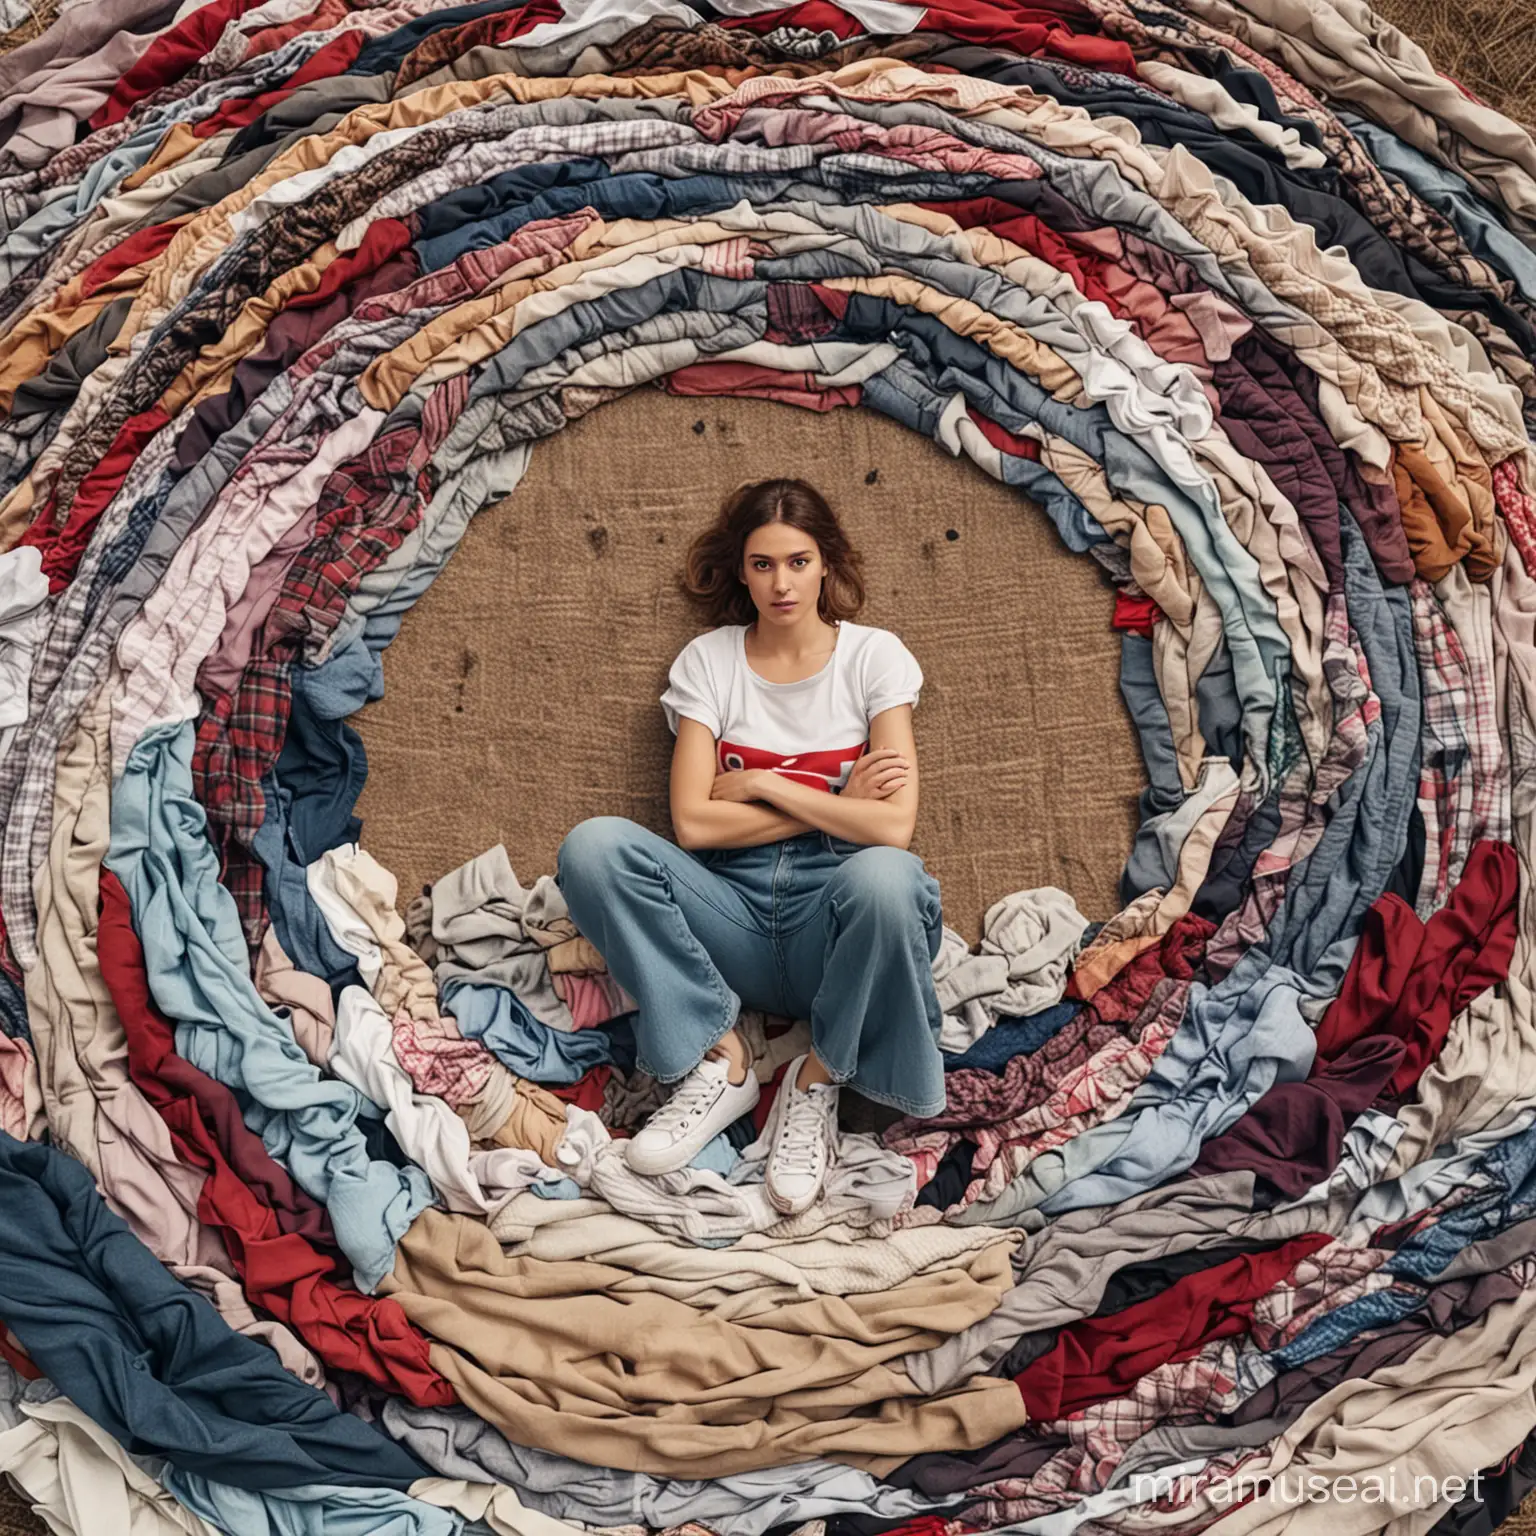 woman sitting on a pile of clothes
wide shot camera angle
recycling symbol should be included